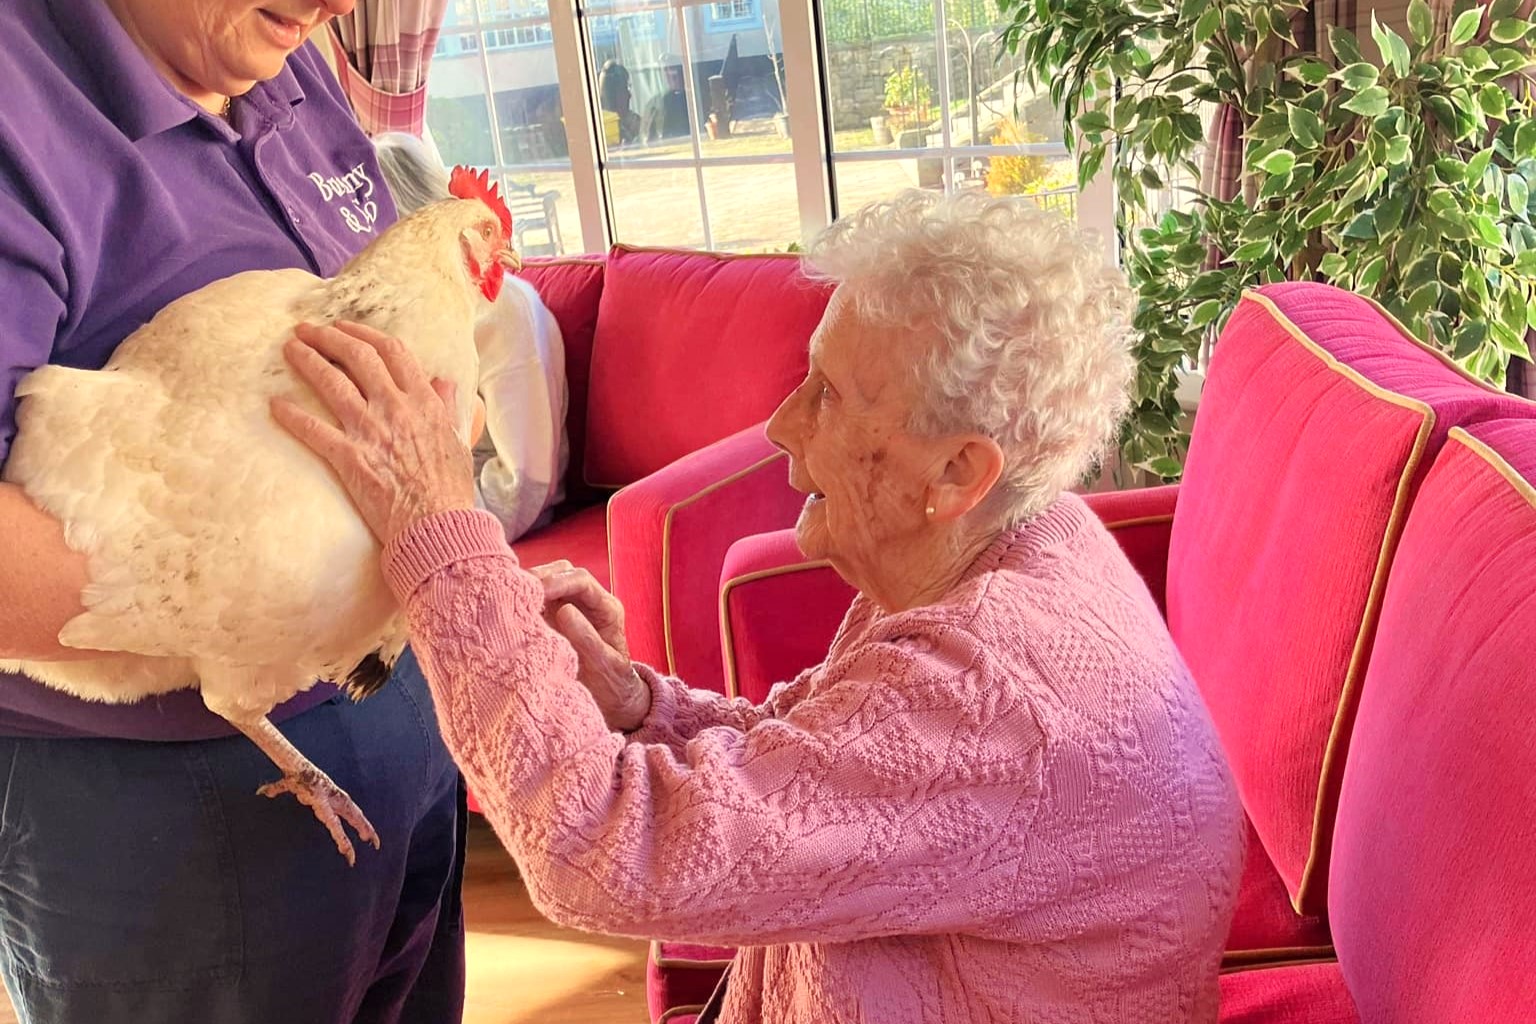 Residents at Wheatlands enjoyed a visit from Bunny & Co petting zoo.